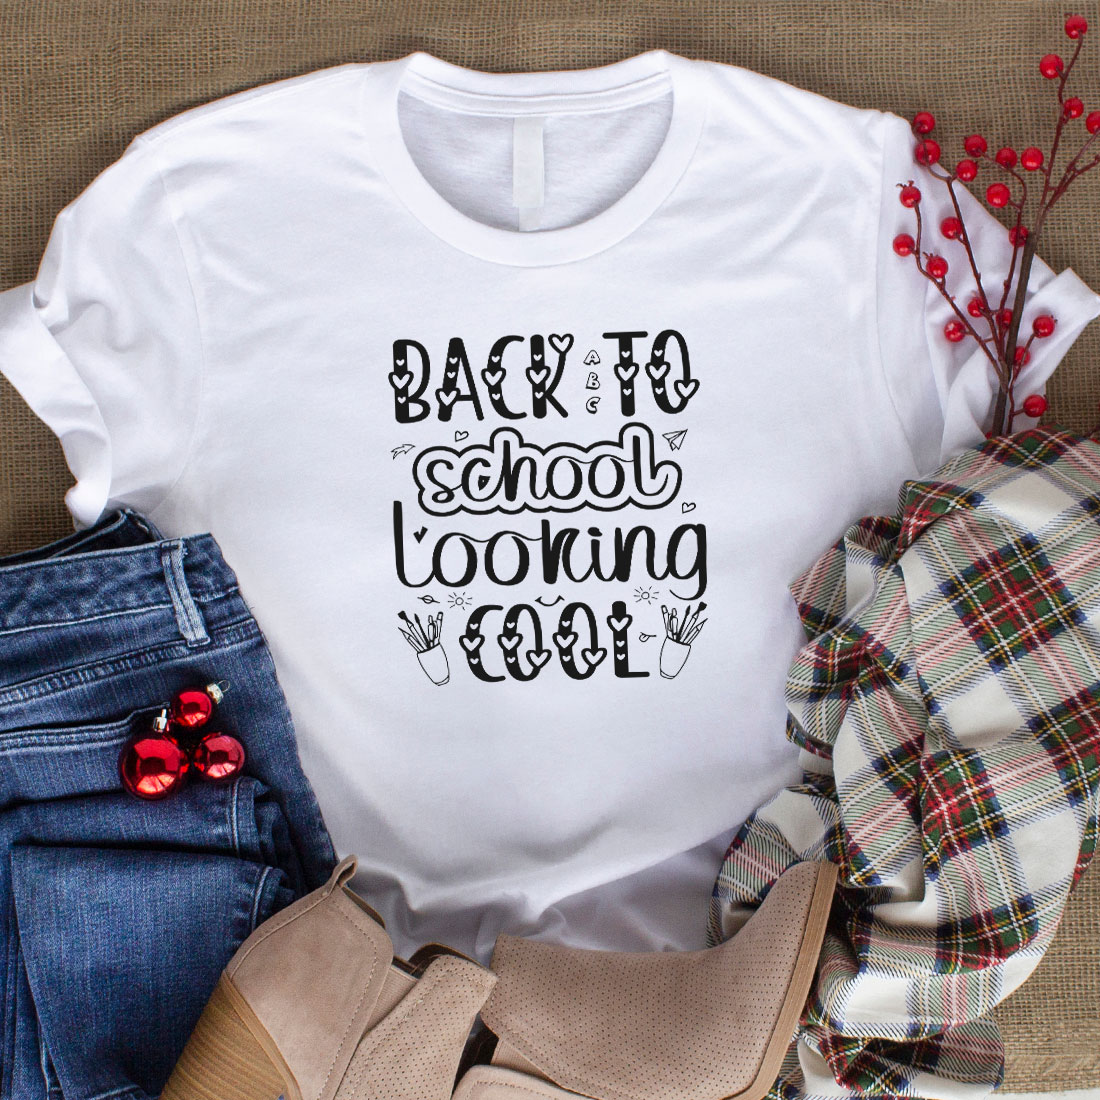 Image of a white t-shirt with a charming slogan Back to school looking cool